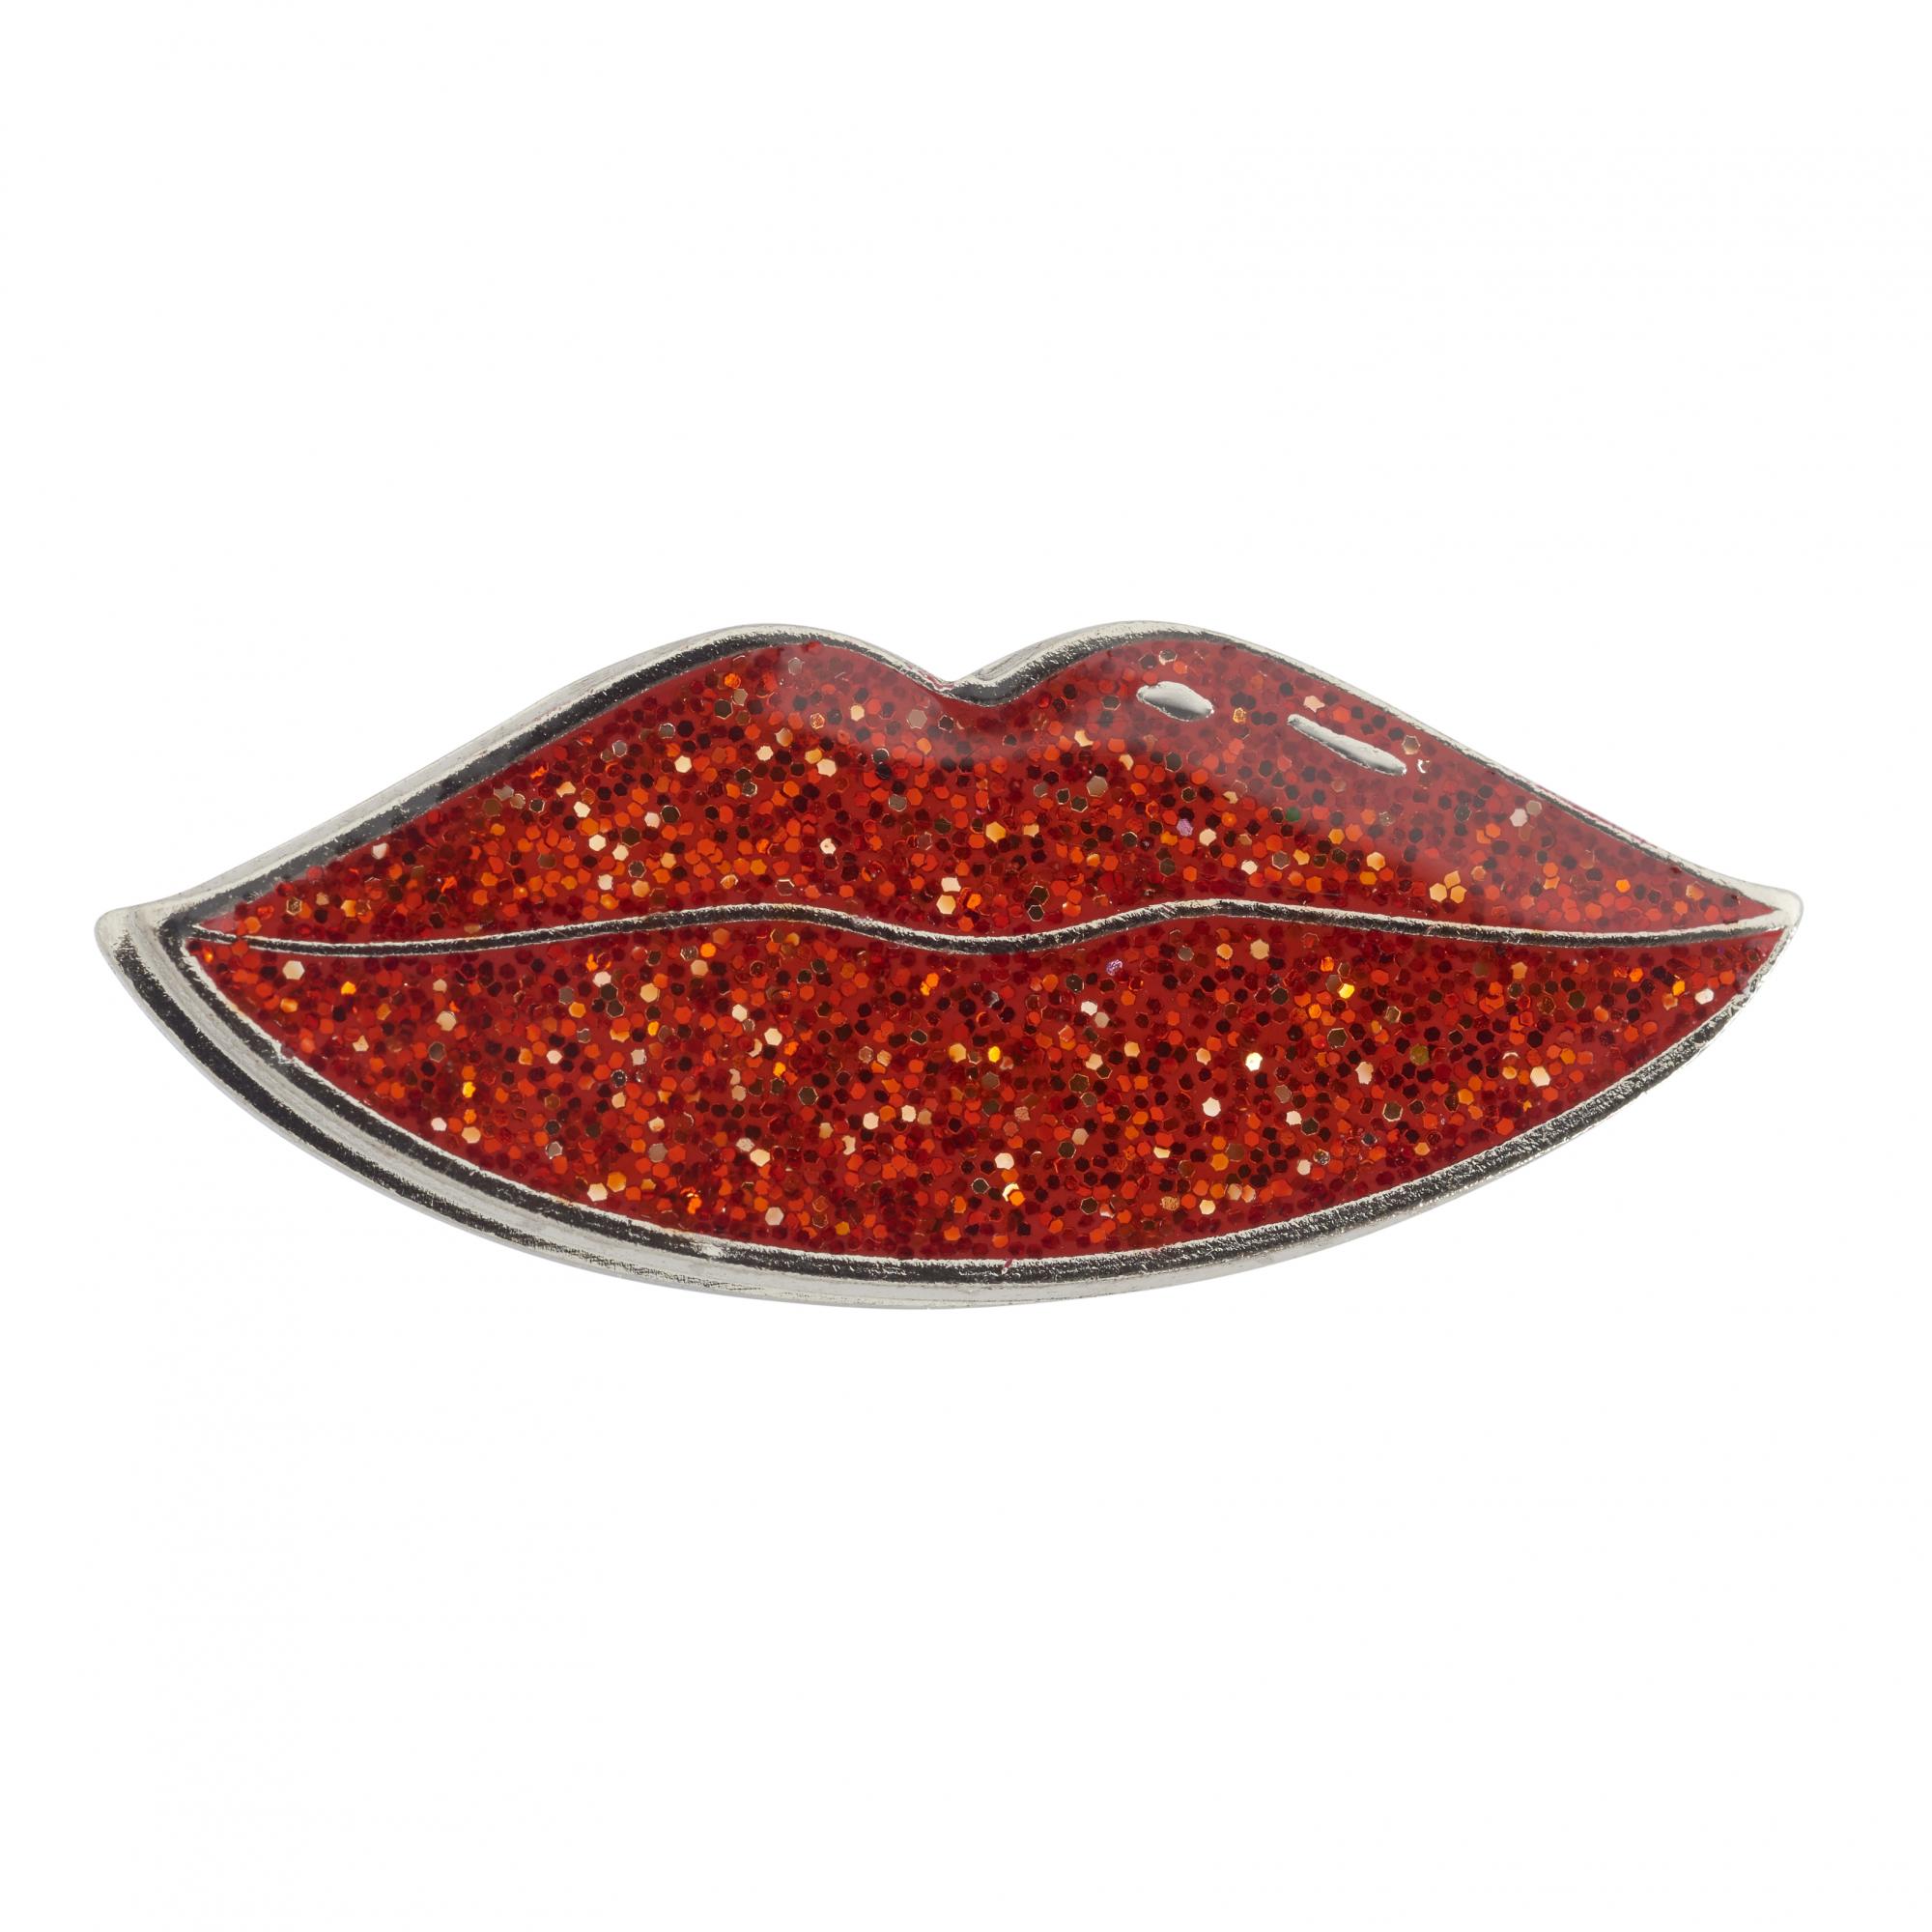 Glitter Lips Pin Badge Wedding Favour | Cancer Research UK Online Shop